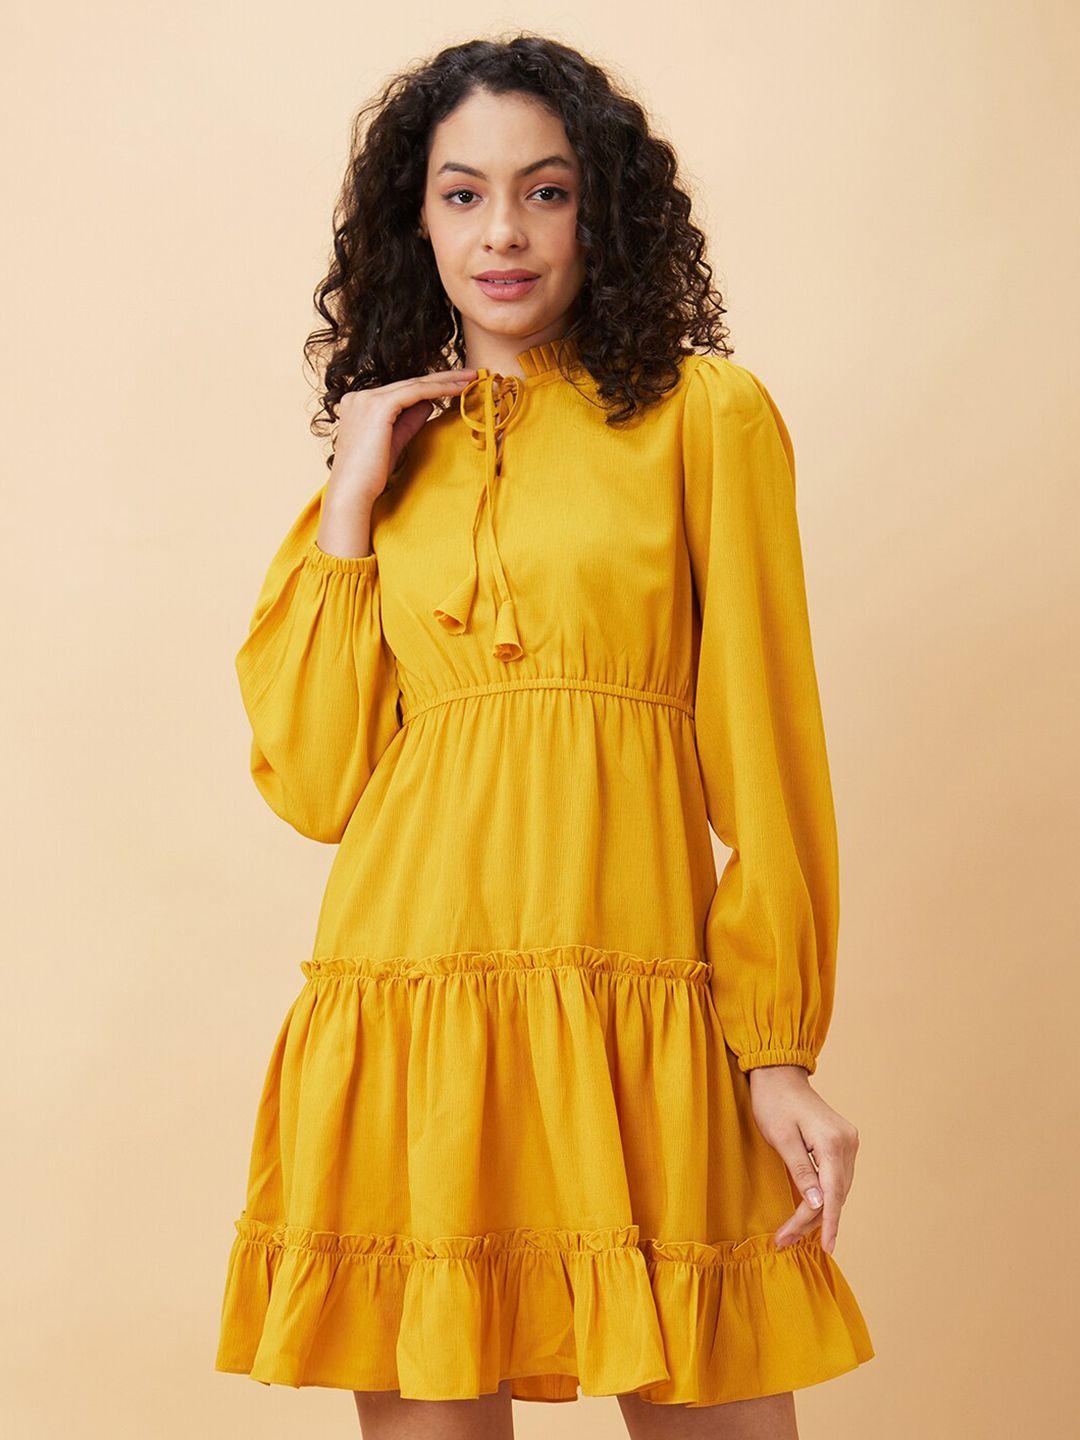 globus tie-up neck puff sleeves gathered or pleated chiffon fit & flare dress